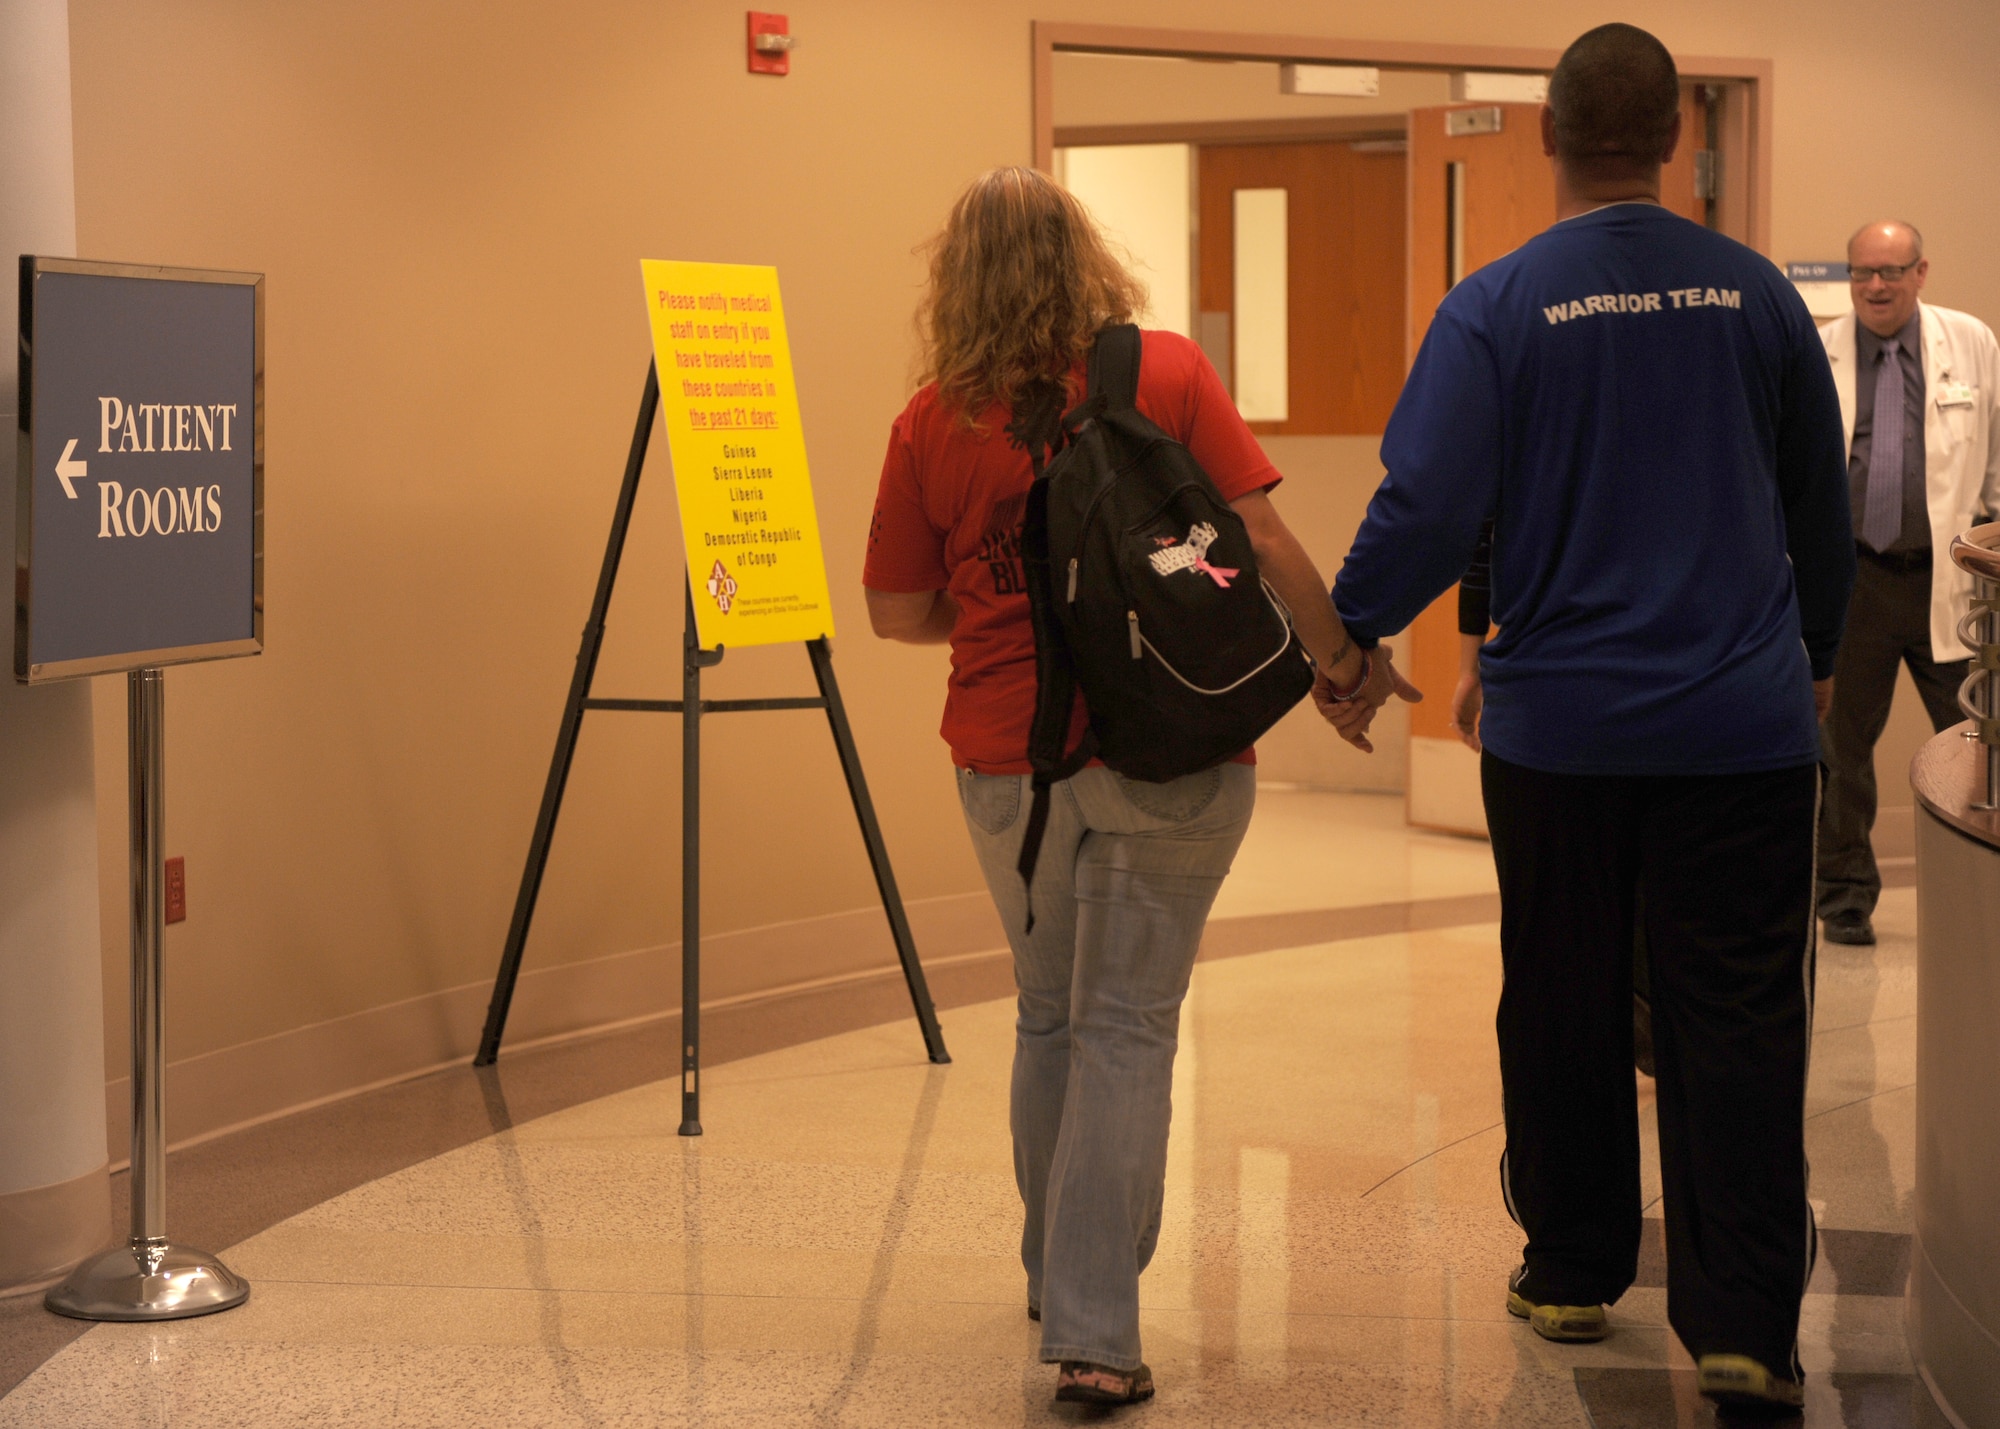 Tech. Sgt. Jason Caswell, a 19th Aircraft Maintenance Squadron crew chief, along with his wife, Tami, walk hand-in-hand to the preparation room for his operation Oct. 17, 2014, at Baptist Health Medical Center, Little Rock, Ark. After four years and eight surgeries, Caswell decided to get his leg amputated in his, hopefully, final attempt to improve his quality of life. (U.S. Air Force photo by Airman 1st Class Scott Poe)